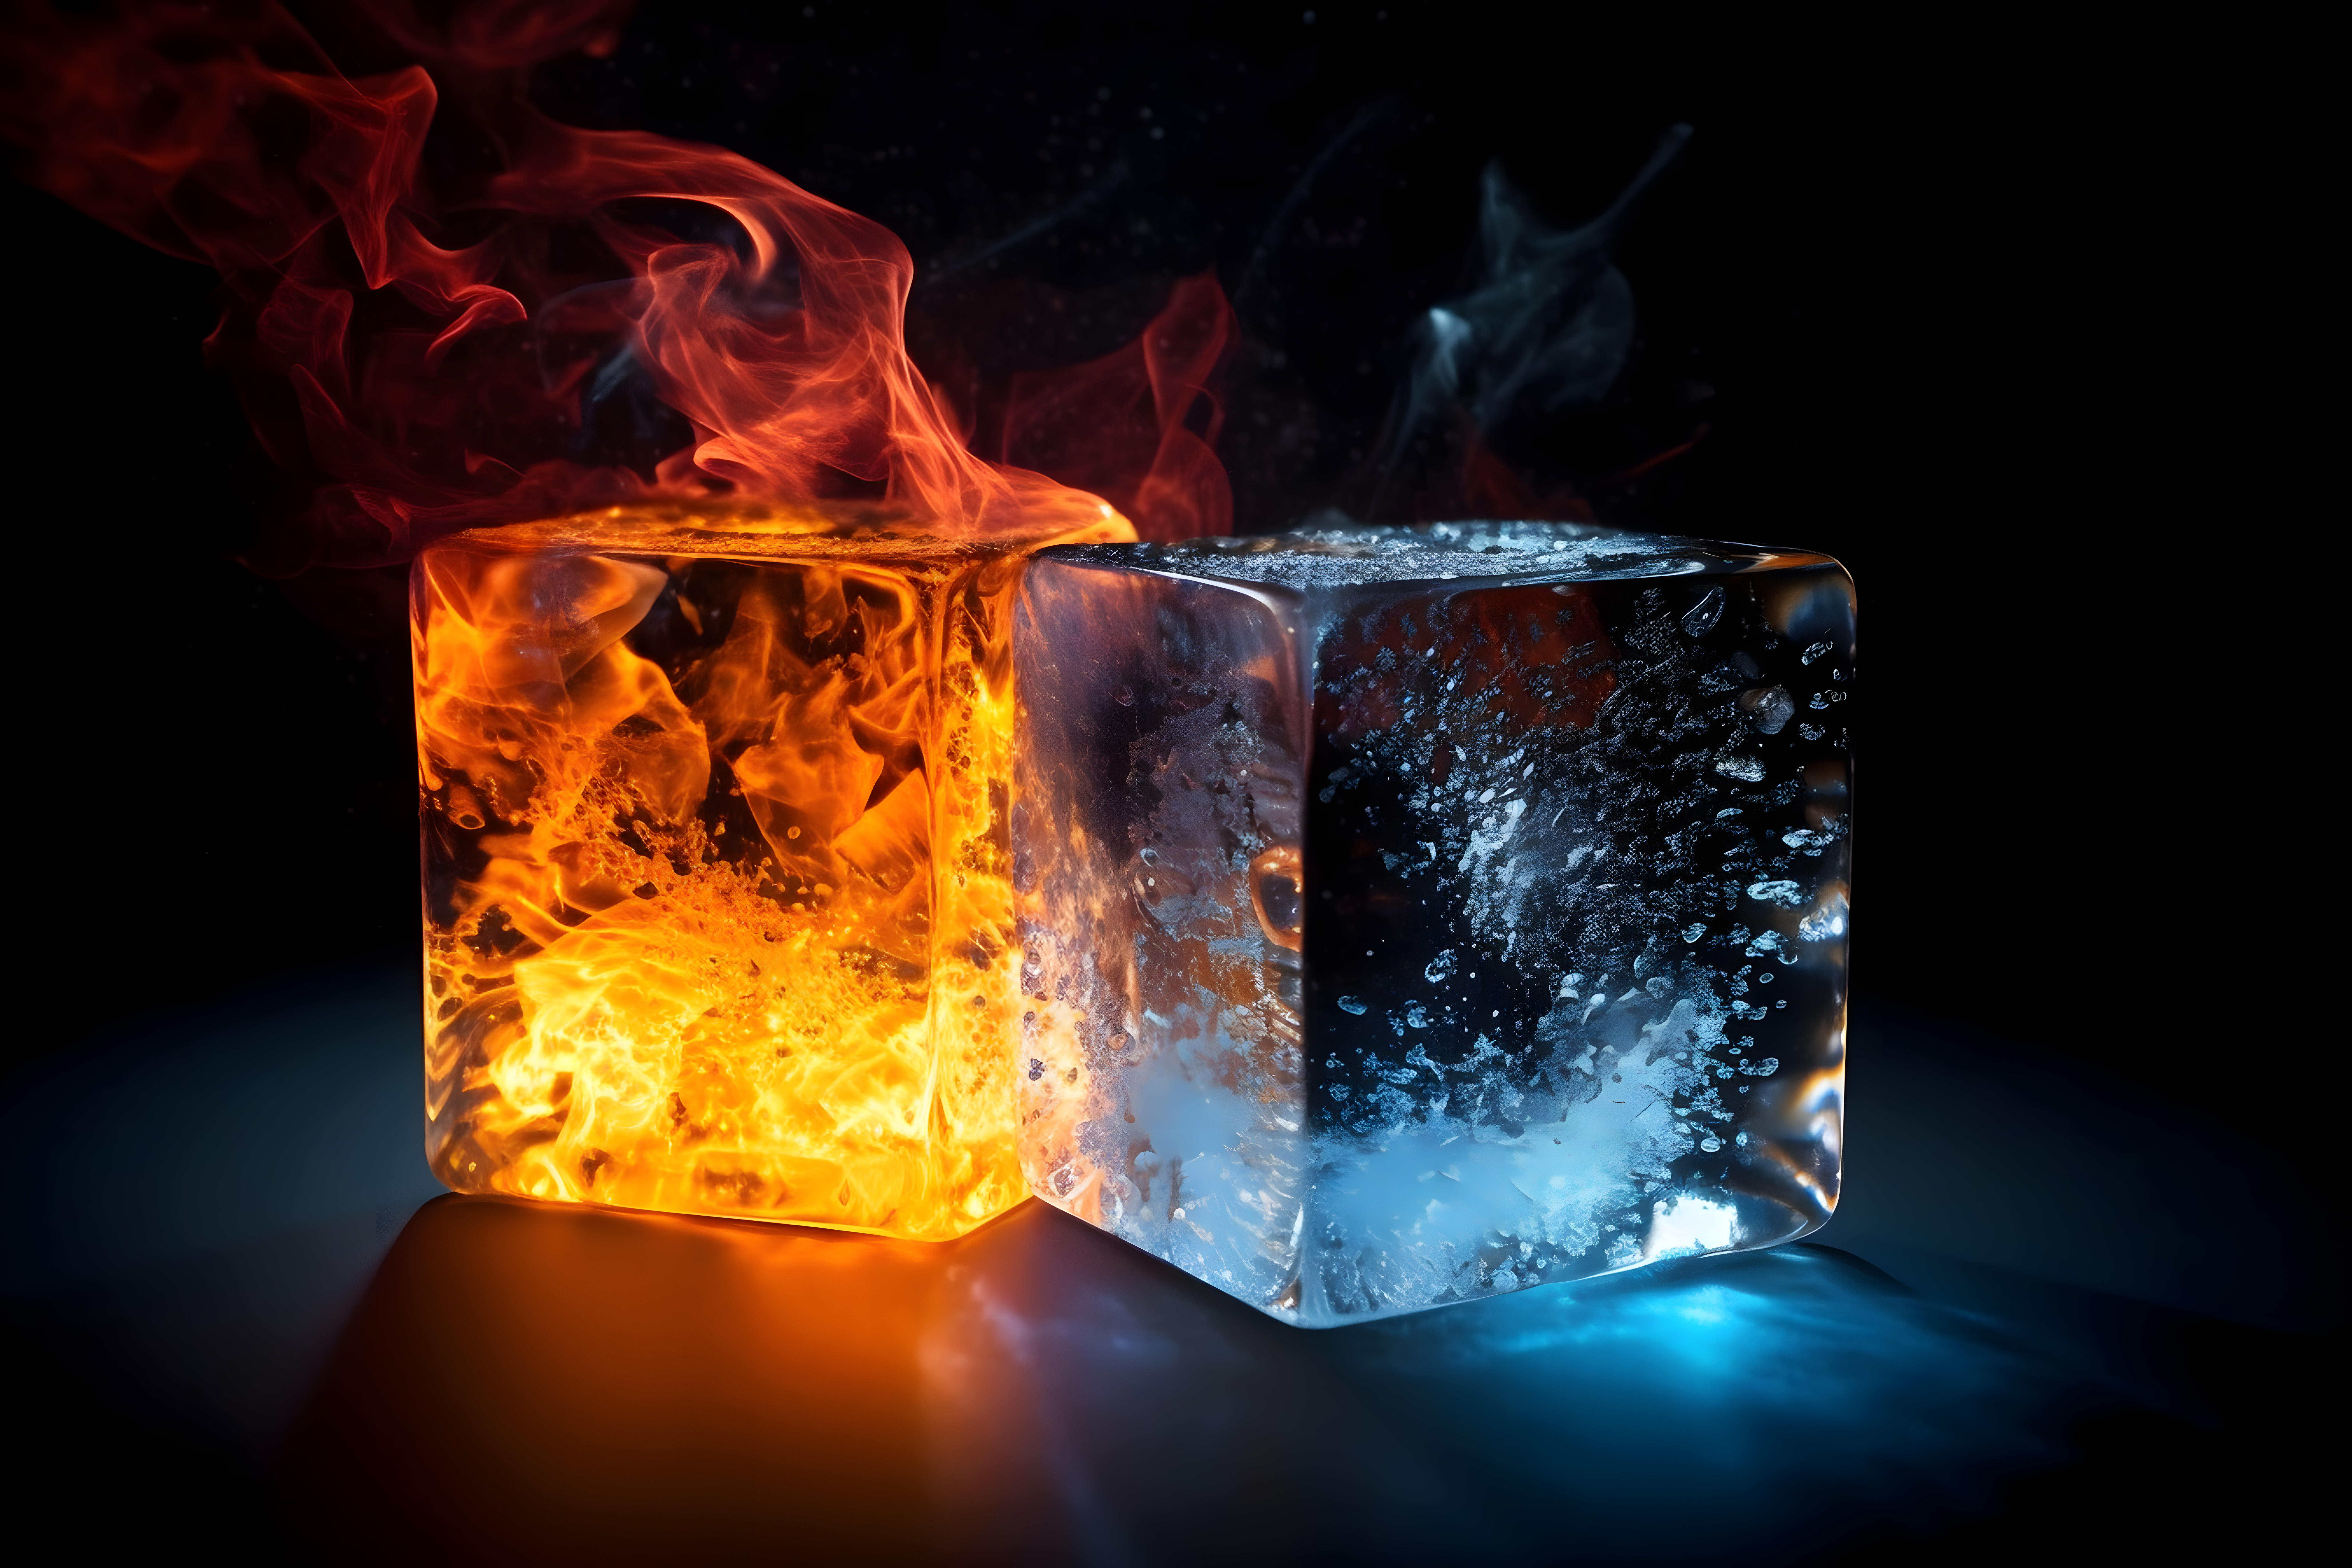 Fire and ice colliding